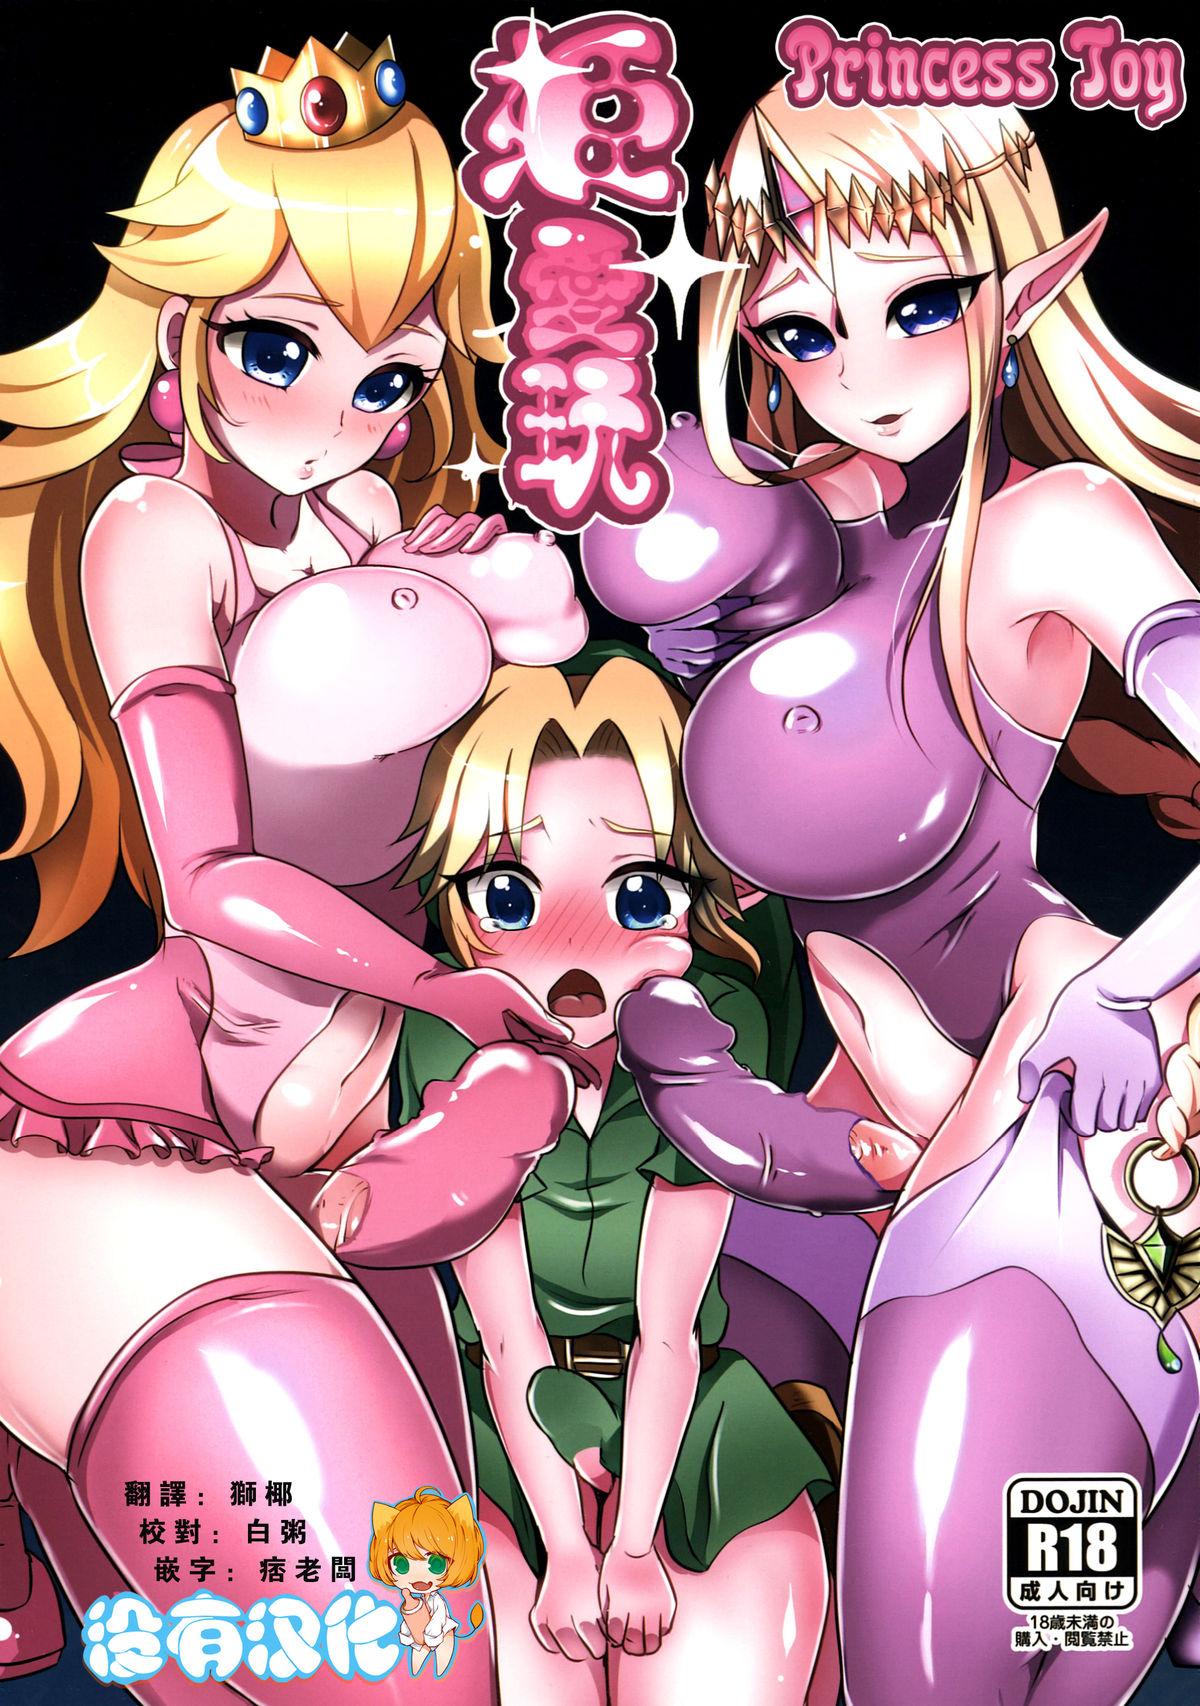 Perverted Hime Aigan - The legend of zelda Super mario brothers Gay Brokenboys - Page 1